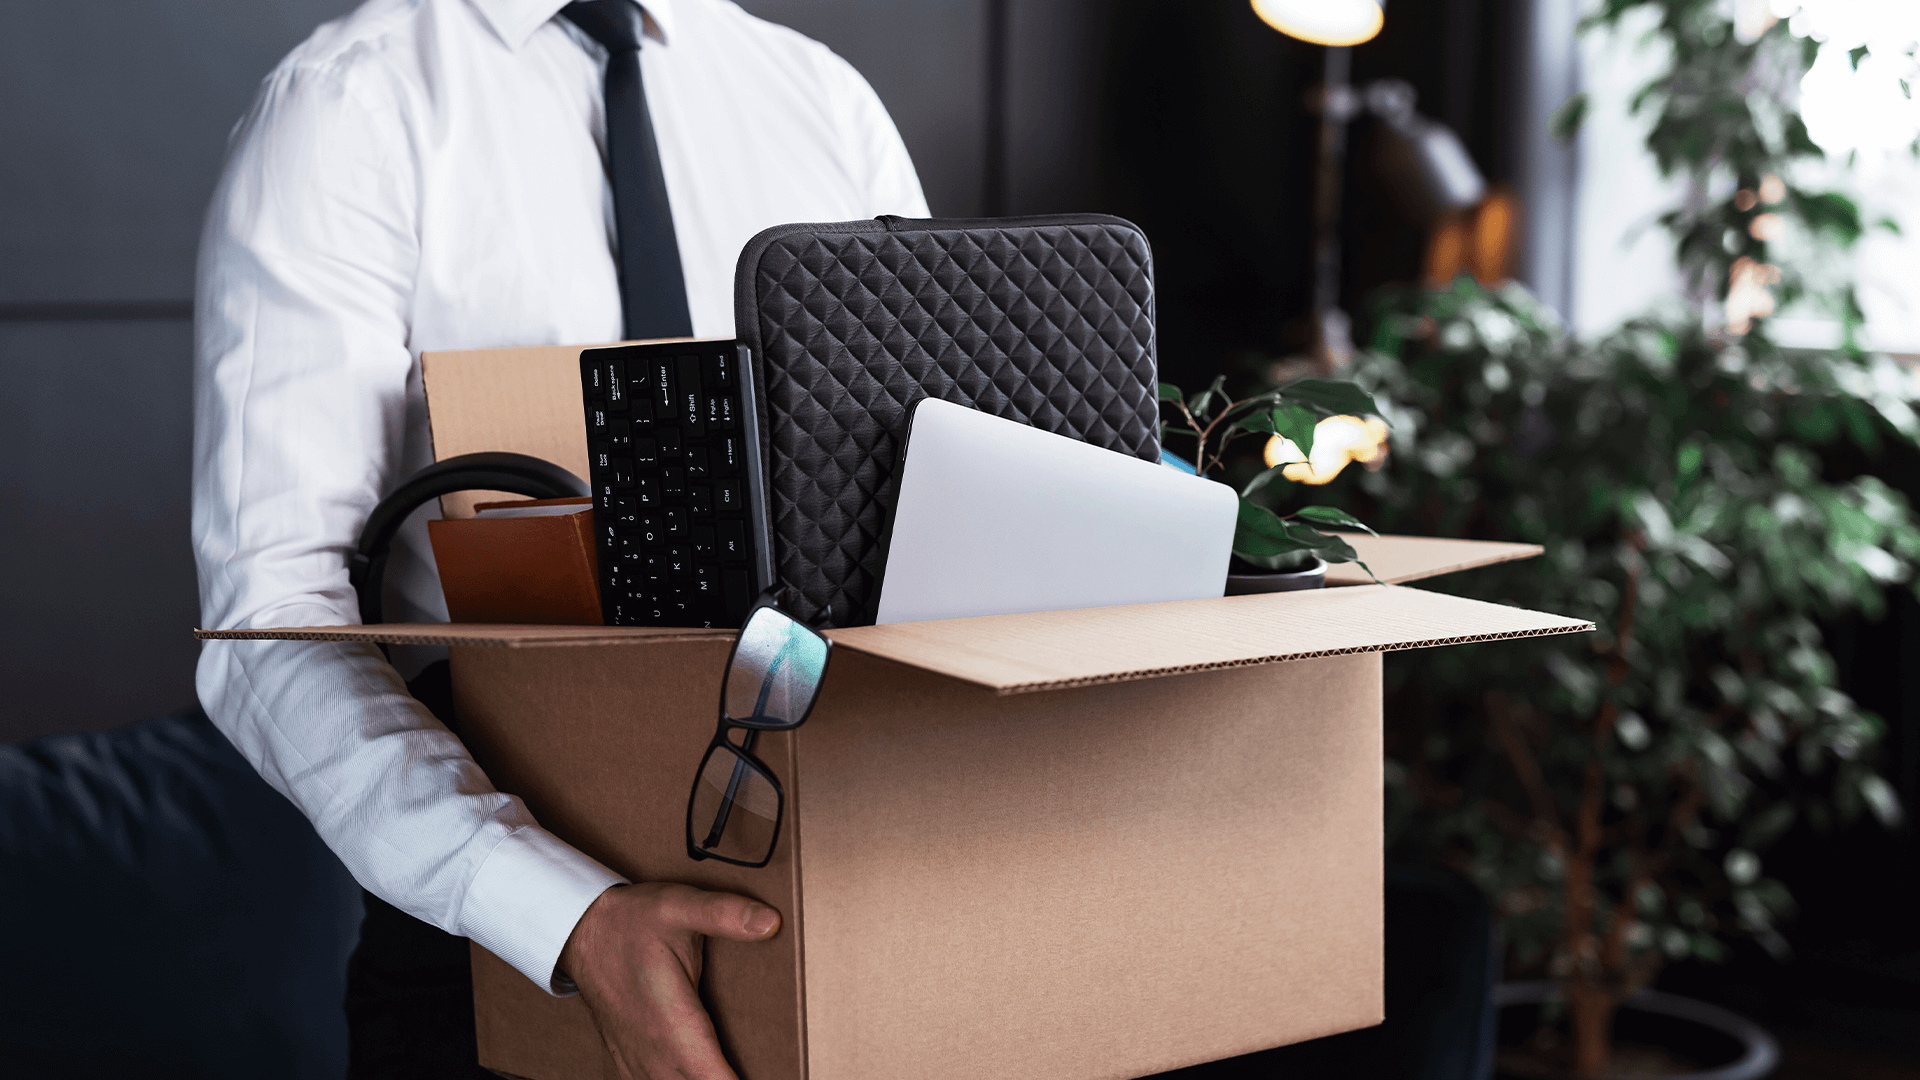 The image shows a professional with a box with his work things, symbolizing it turnover.